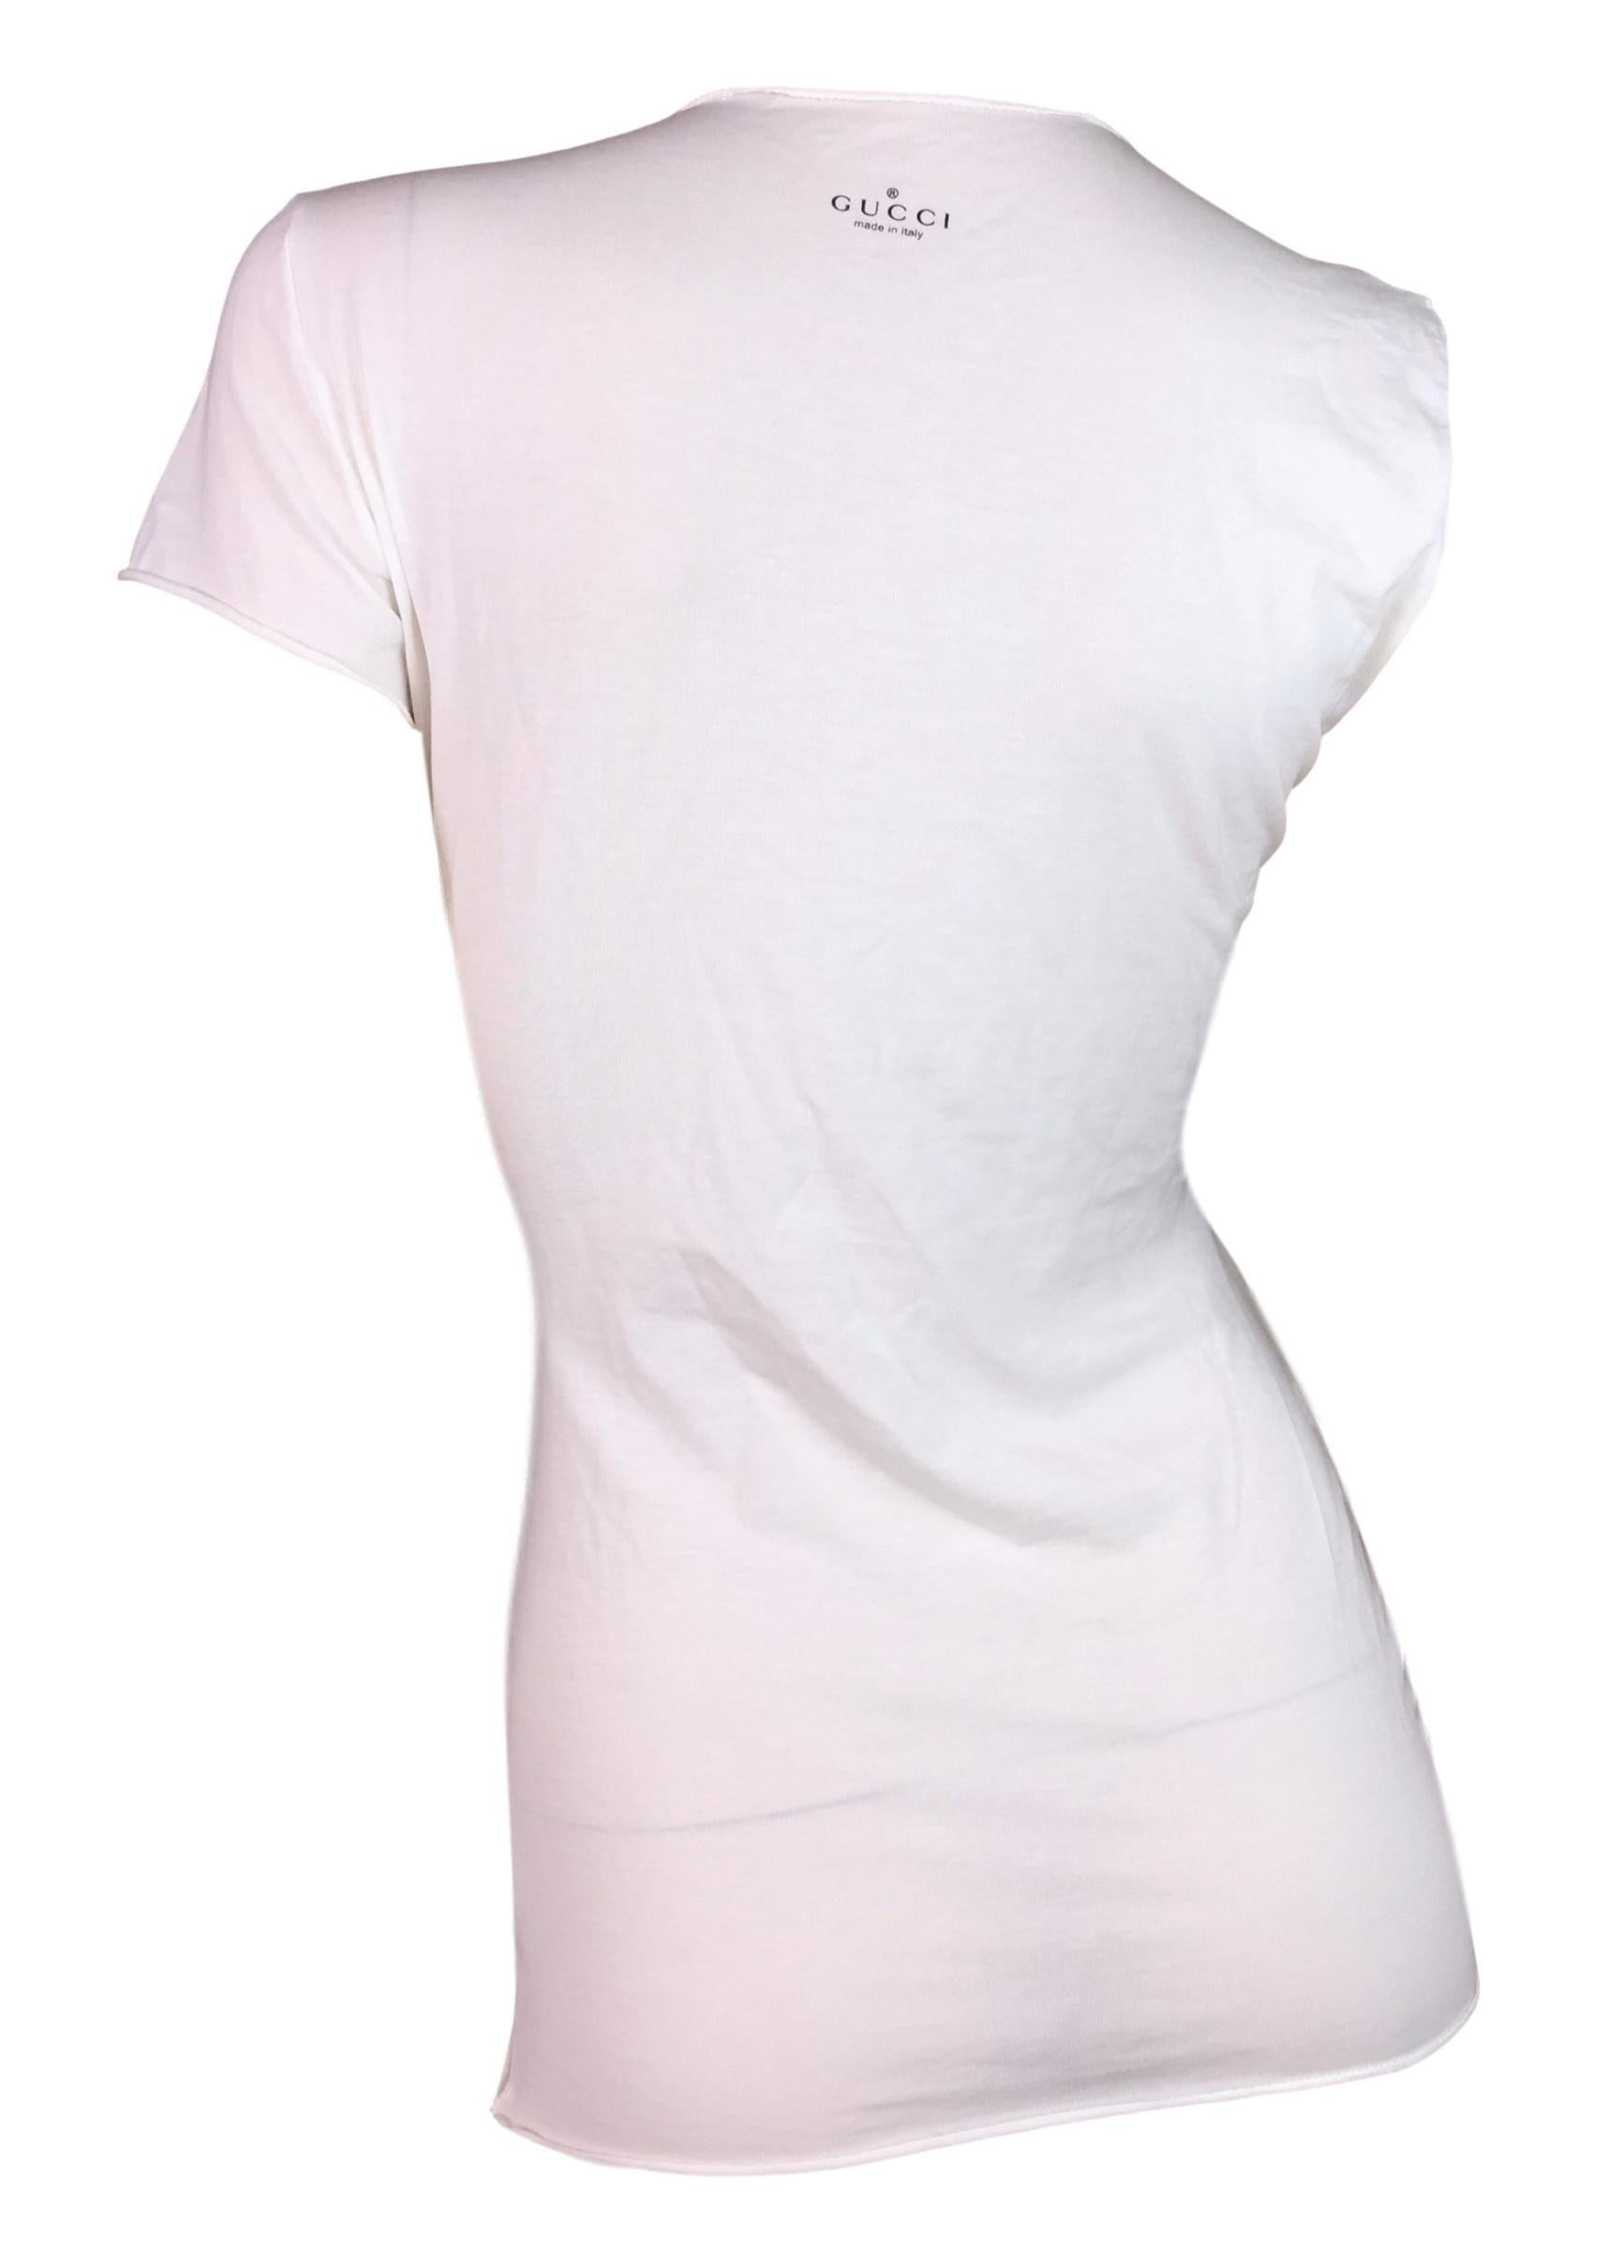 Gray S/S 2001 Gucci by Tom Ford Runway White Cut-Out T-Shirt Crop Top